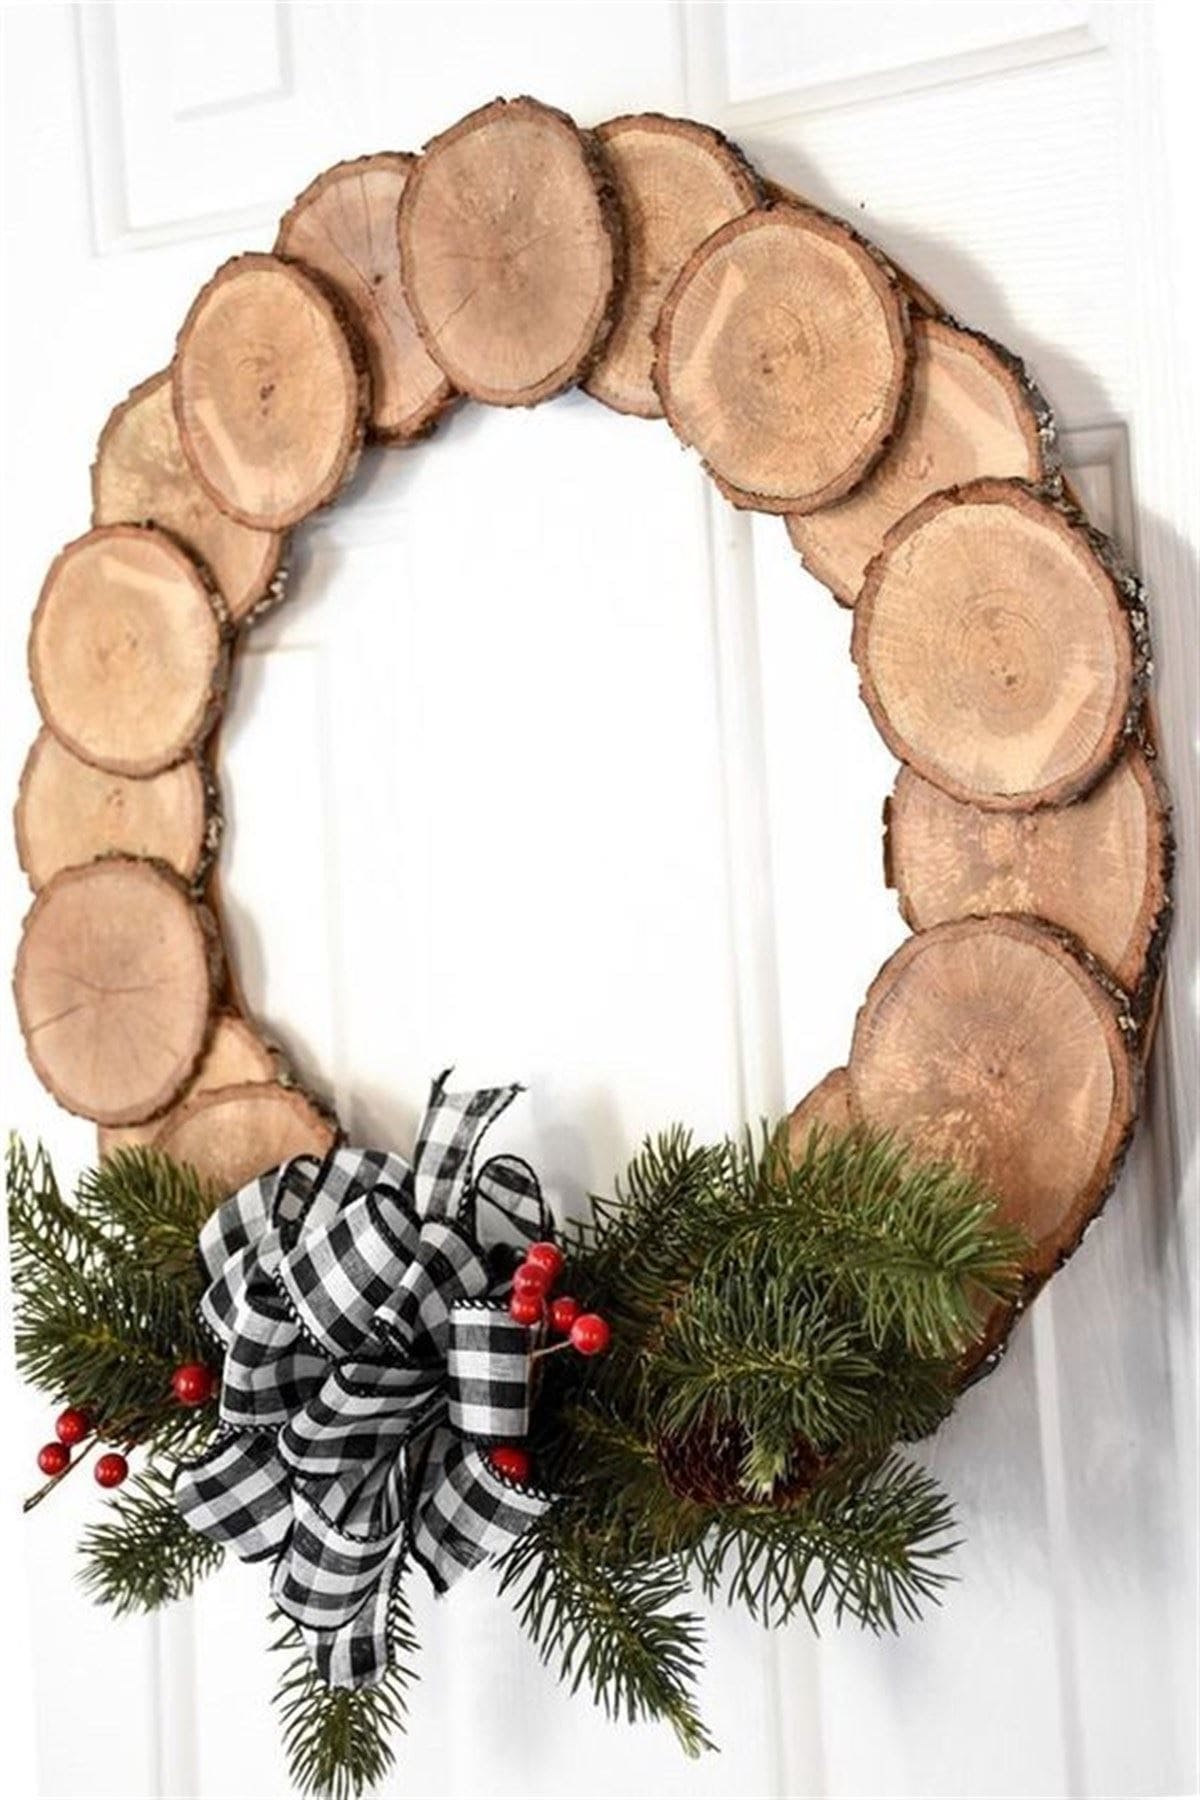 21 amazing DIY projects with tree trunks - 175